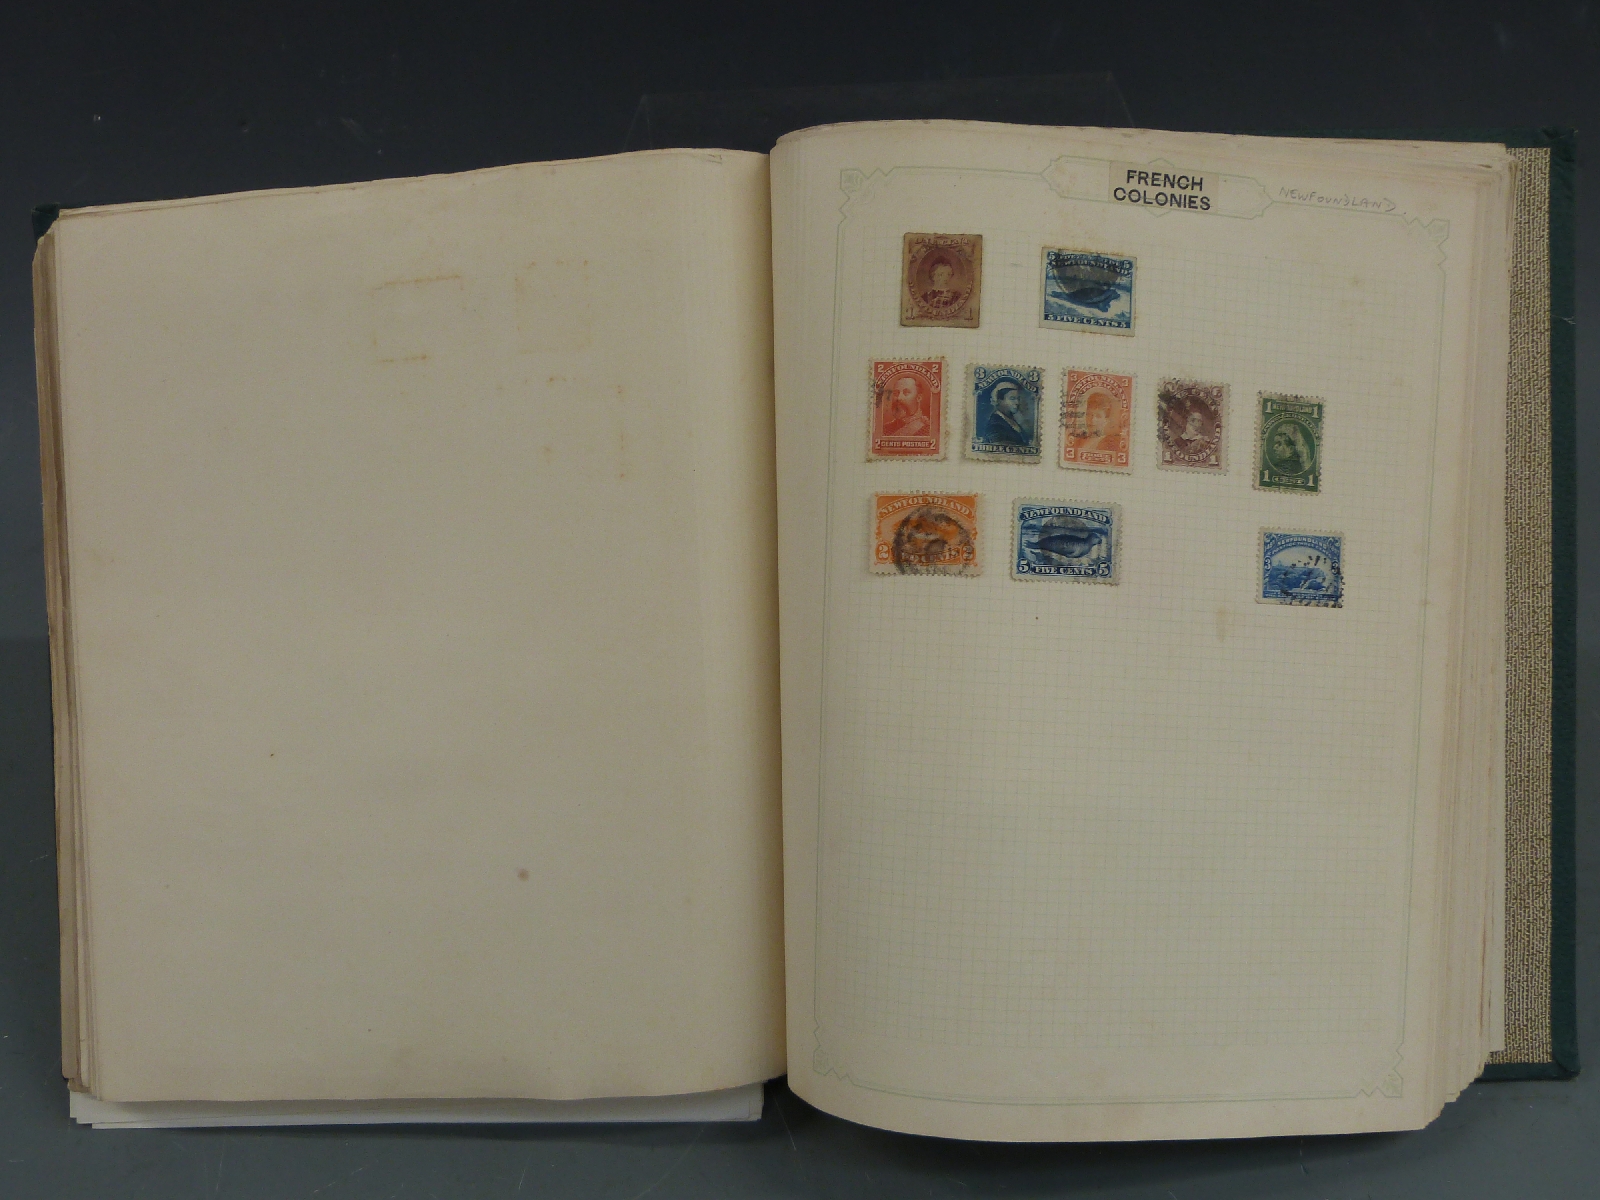 A loose leaf album of Commonwealth stamps plus some foreign stamps, mainly Victoria - George VI - Image 3 of 4